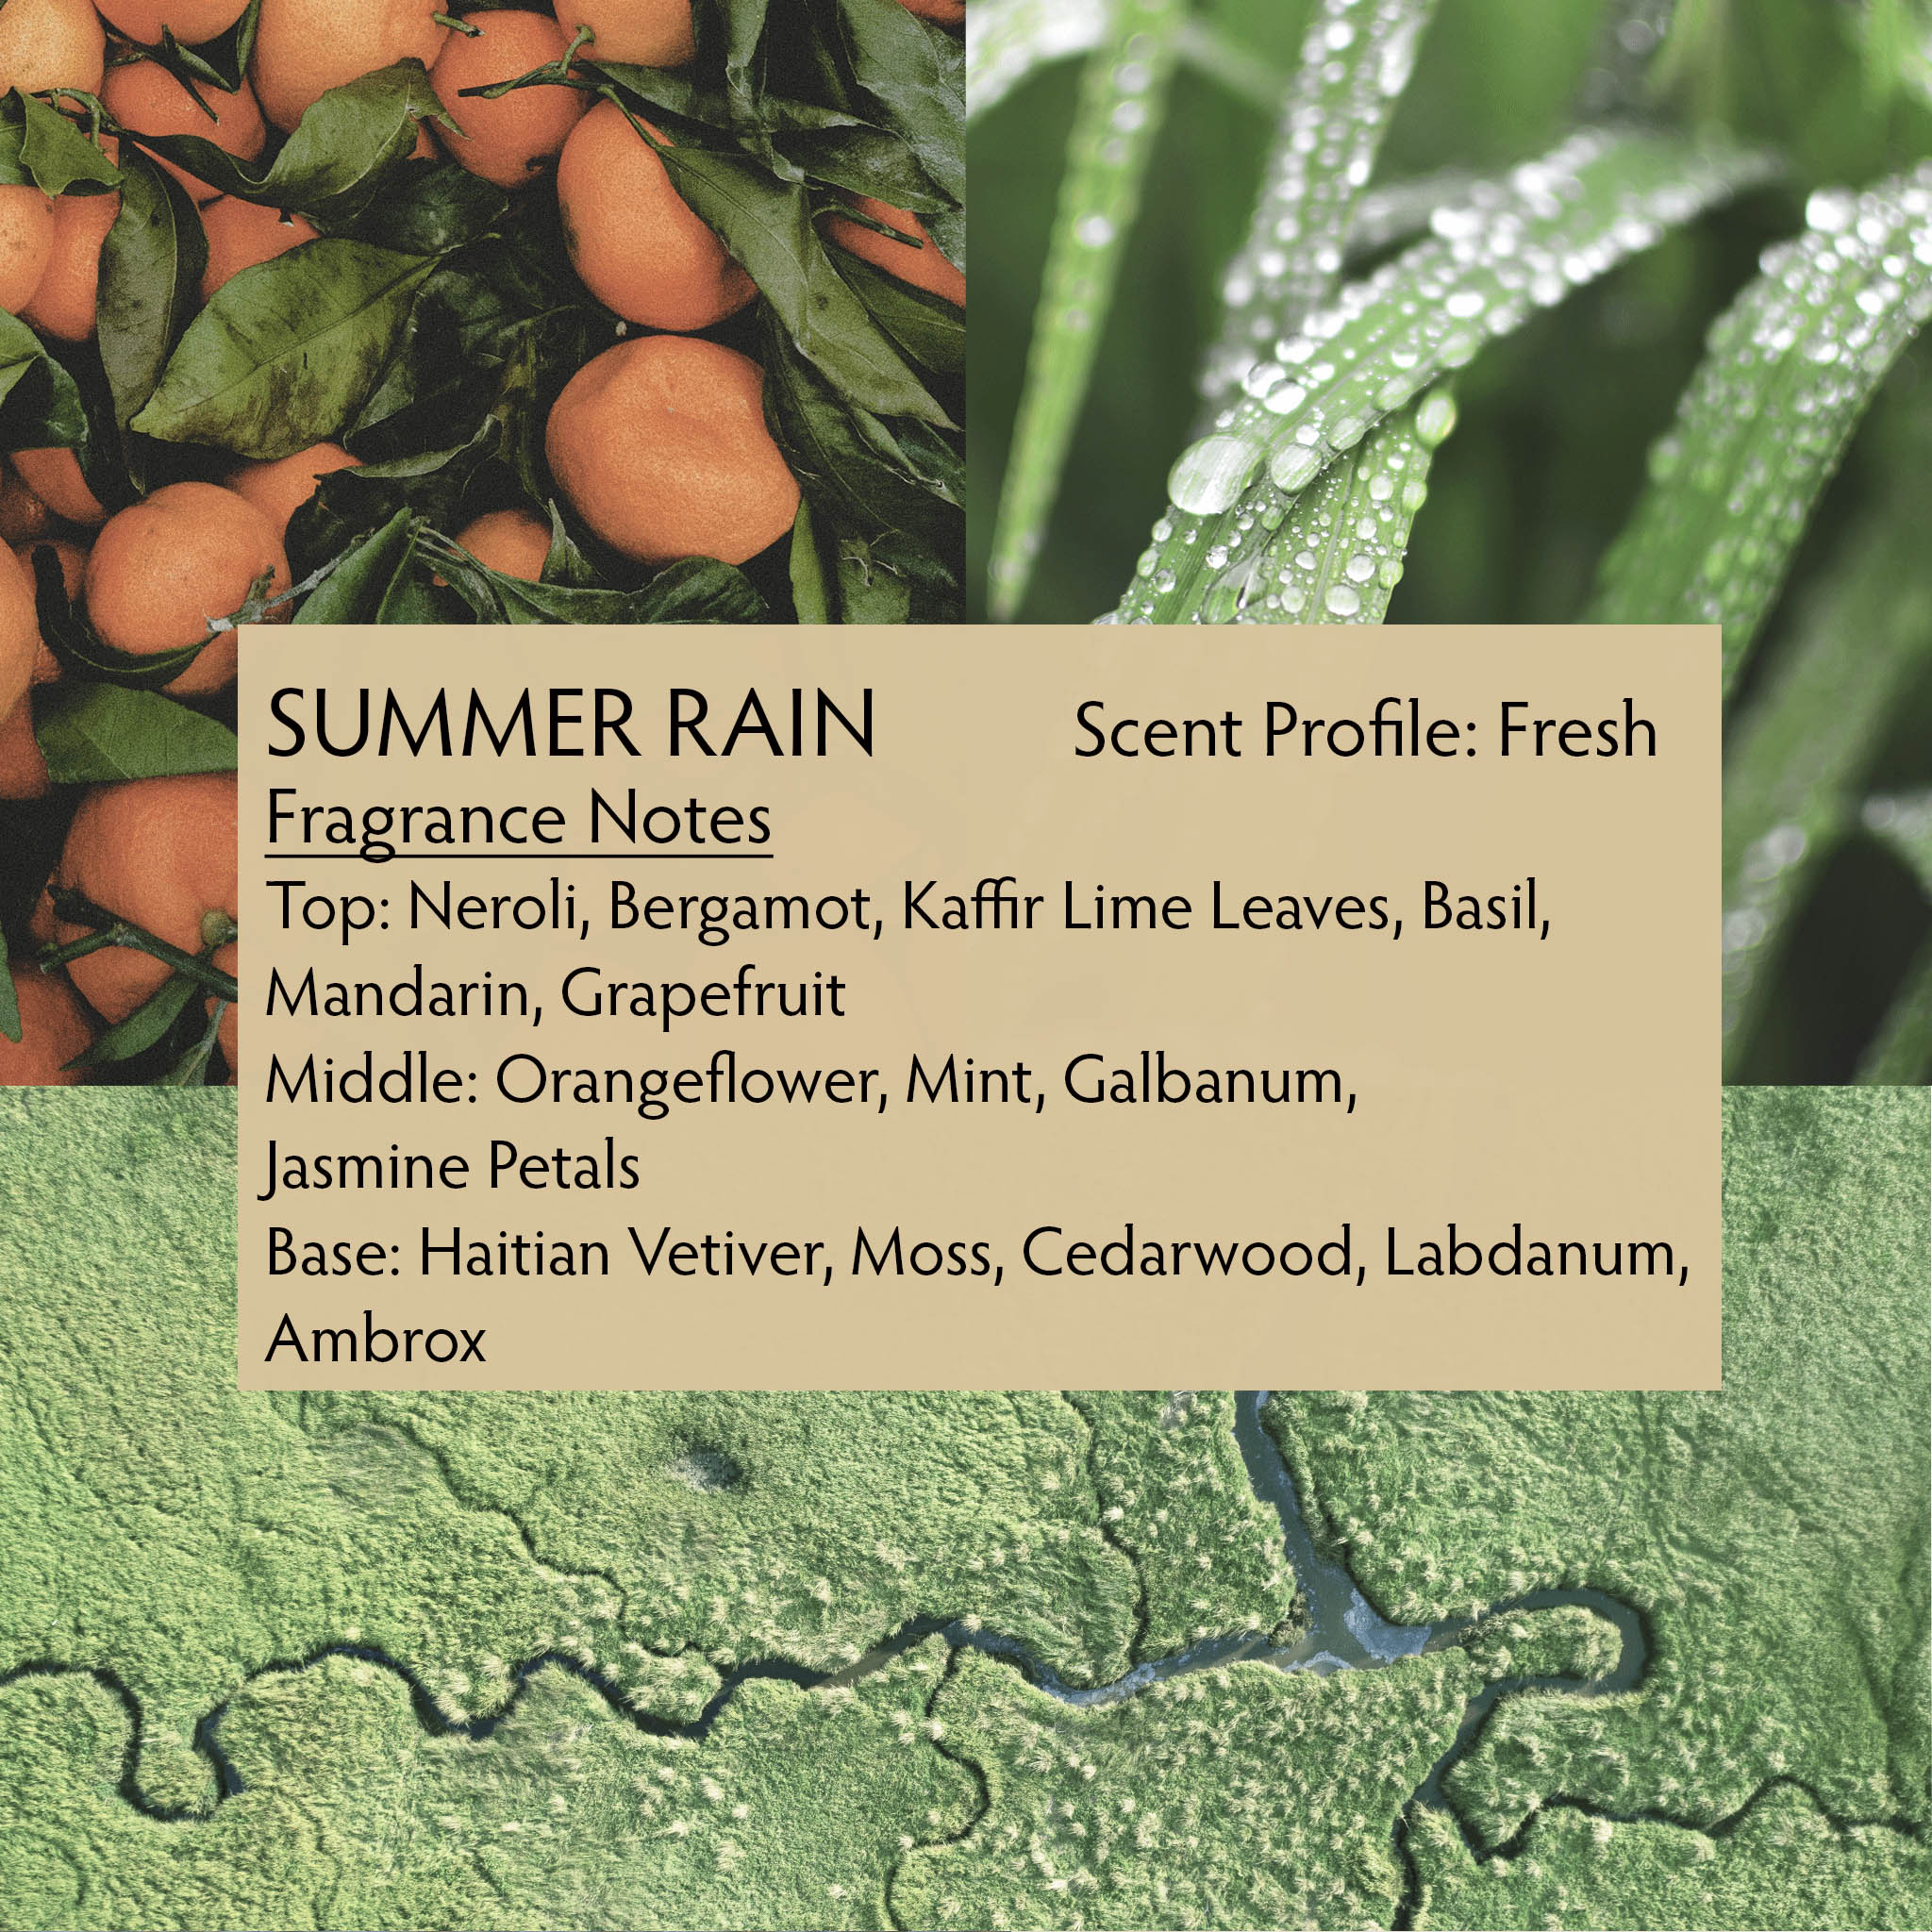 Summer Rain perfume is inspired by summer in the Florida Everglades, when the air is thick with humidity and the afternoon storm clouds build. The summer rain begins, quickly cooling the earth and reviving your spirit. 